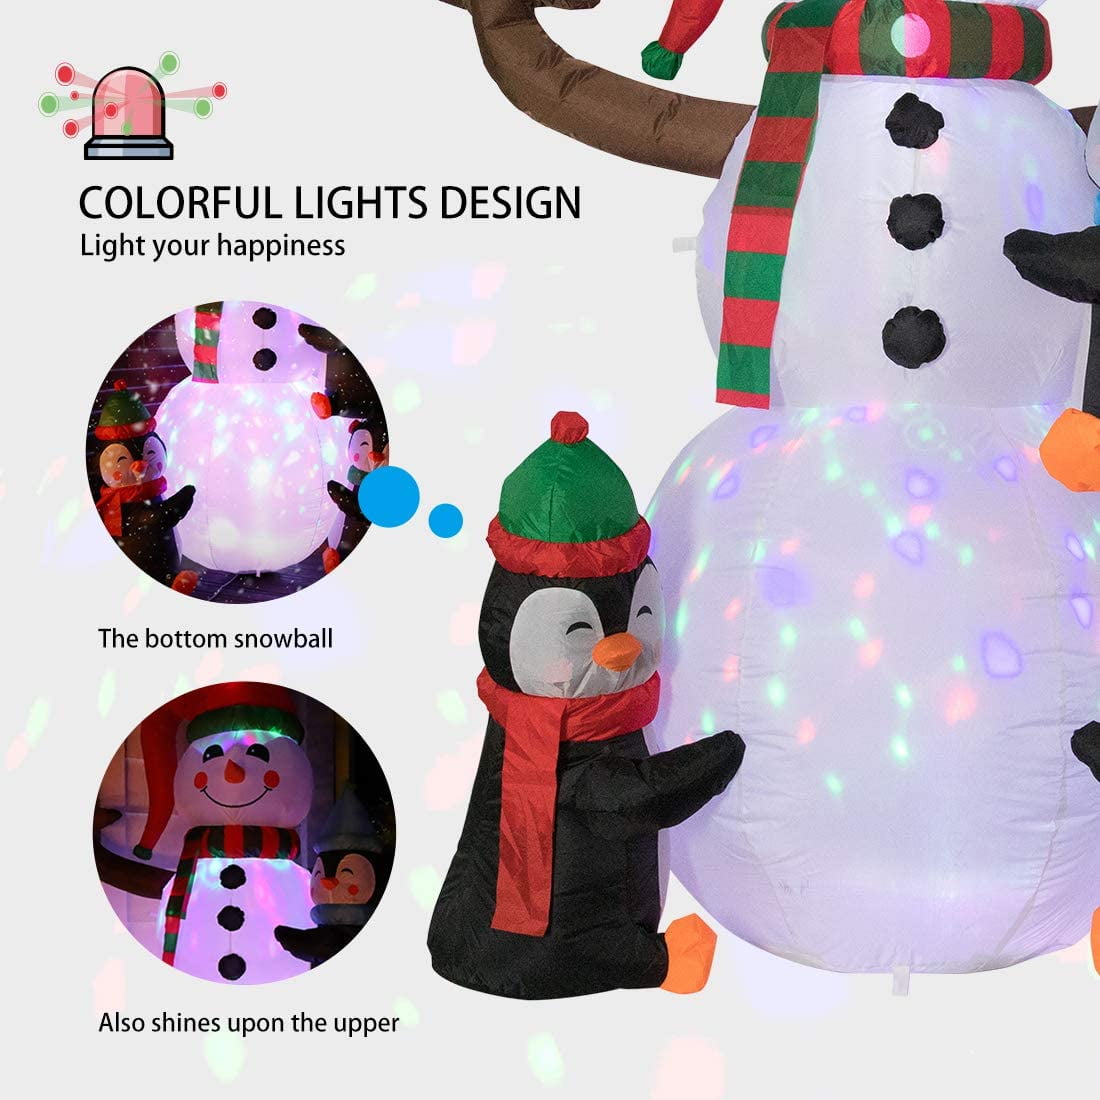 WDDH 8ft Height Christmas Inflatable Snowman and Penguins,Inflatables Outdoor Snowman with Branch Hand and Colorful Rotating Led Lights Blow Up Yard Decoration Clearance for Xmas Party Decor 